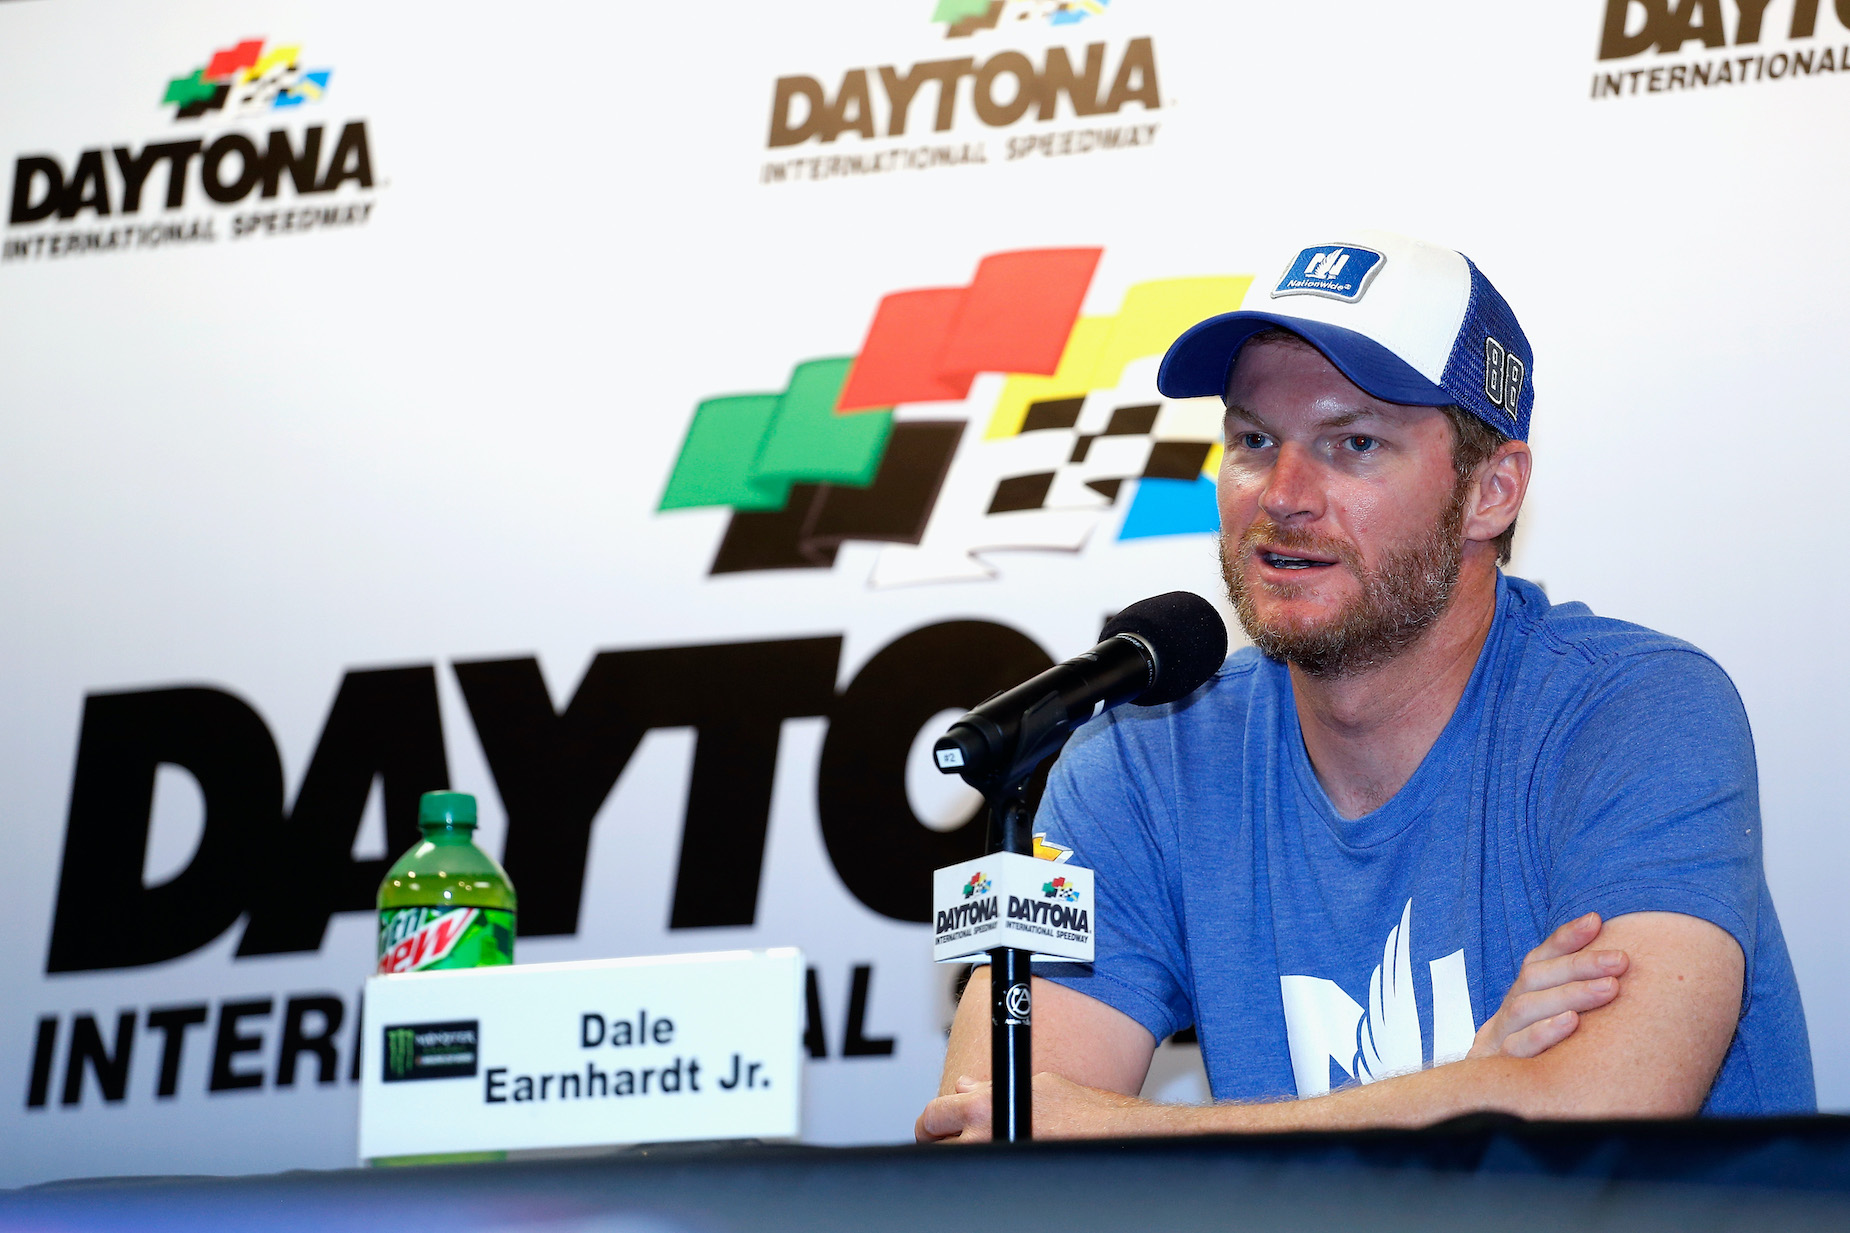 Dale Earnhardt Jr. Doesn’t Hate Daytona International Speedway, Despite His Father’s Tragic Death: ‘I Chose to Embrace the Track’